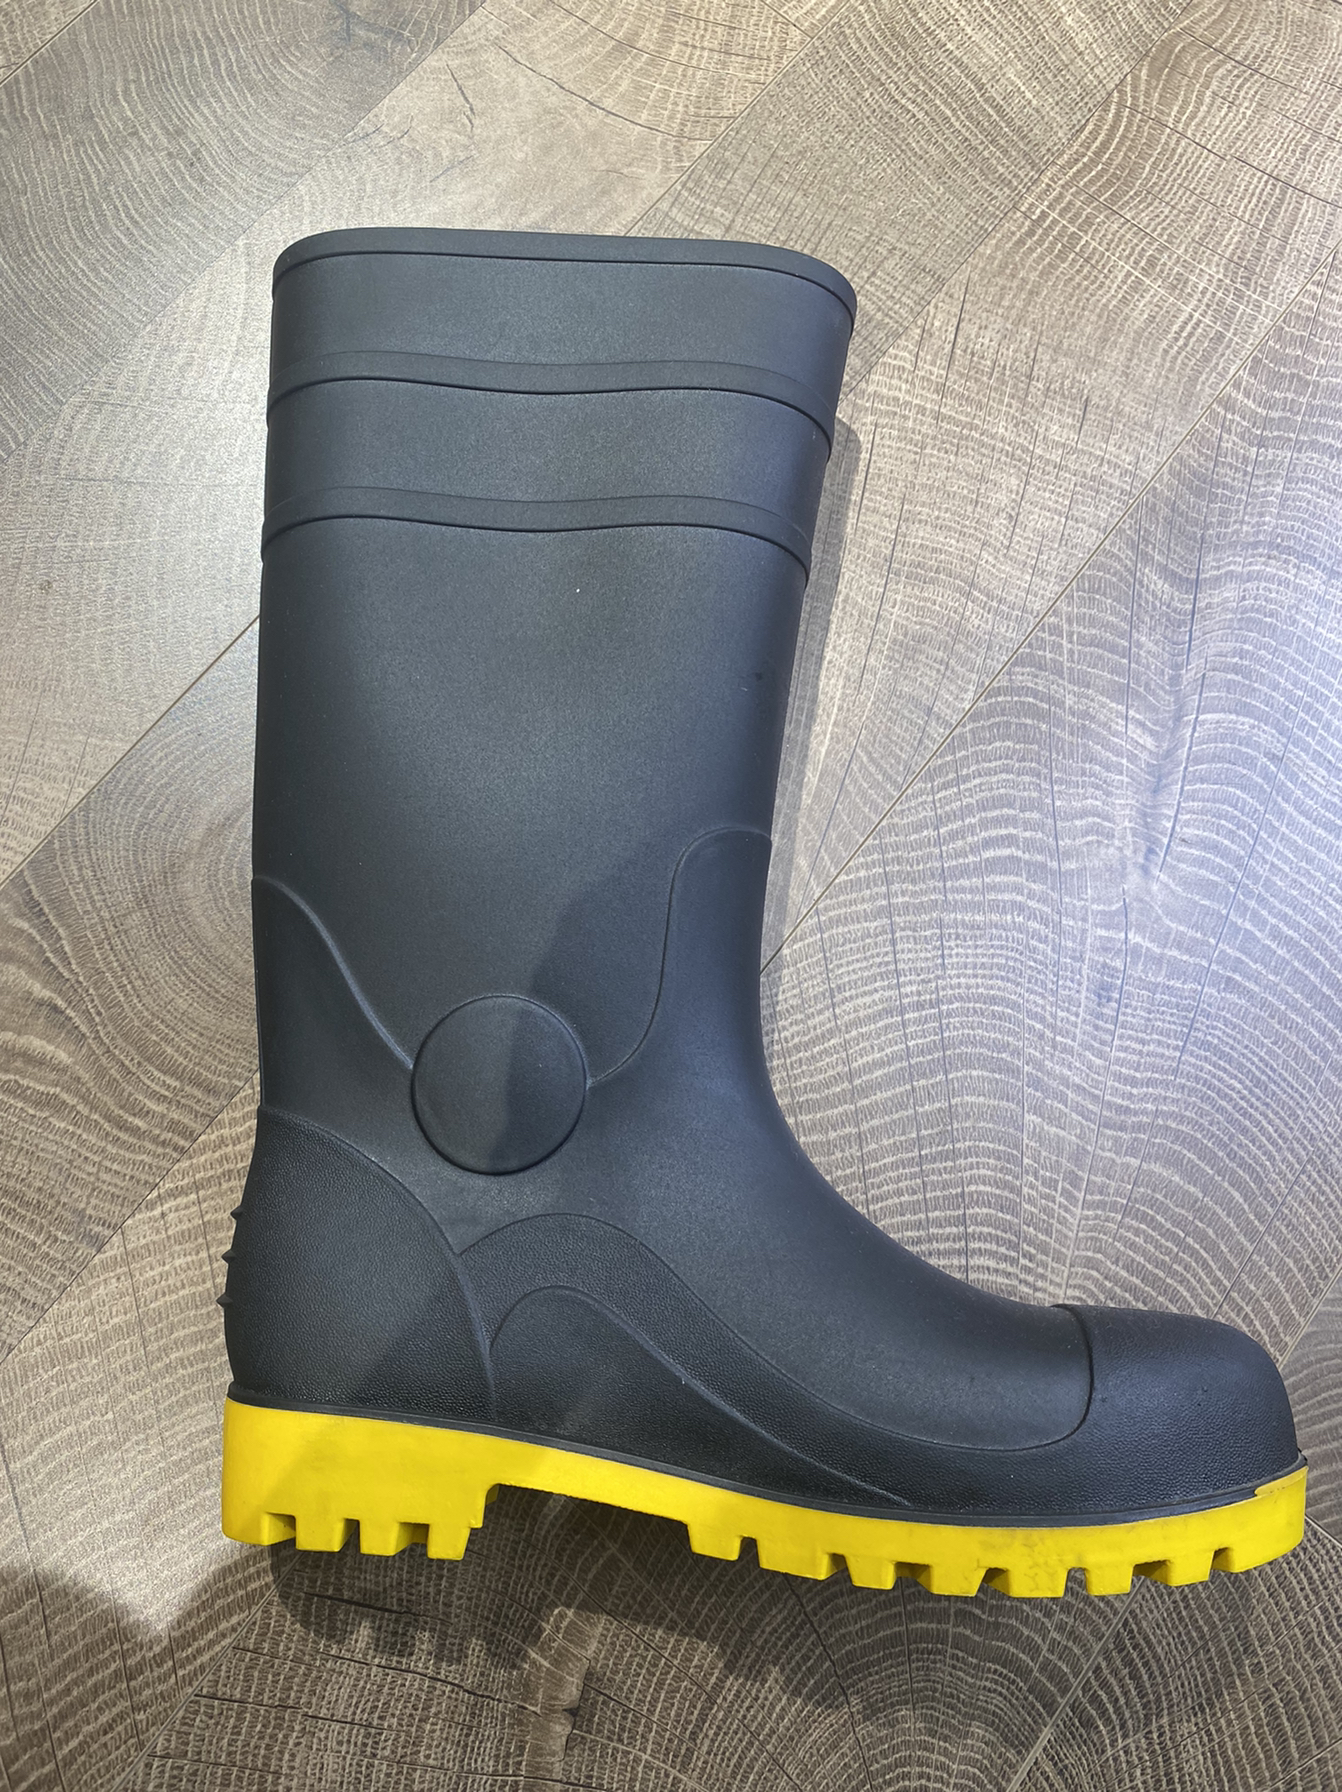 Safety Sport Boots Steel Toe and SS Sole for special work